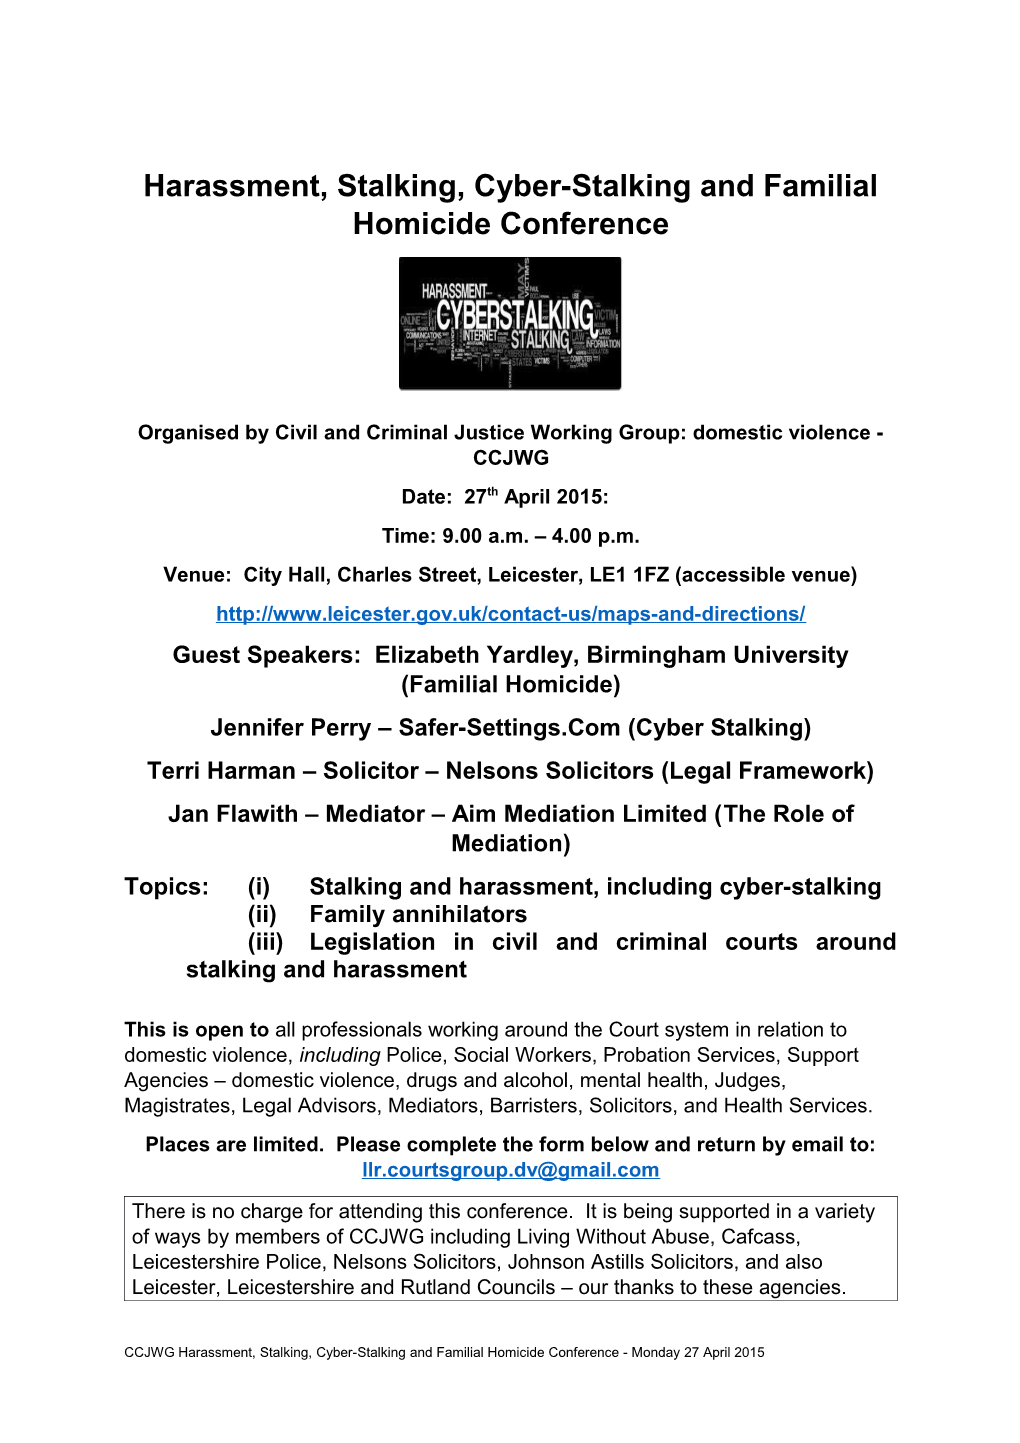 Harassment, Stalking, Cyber-Stalking and Familial Homicide Conference